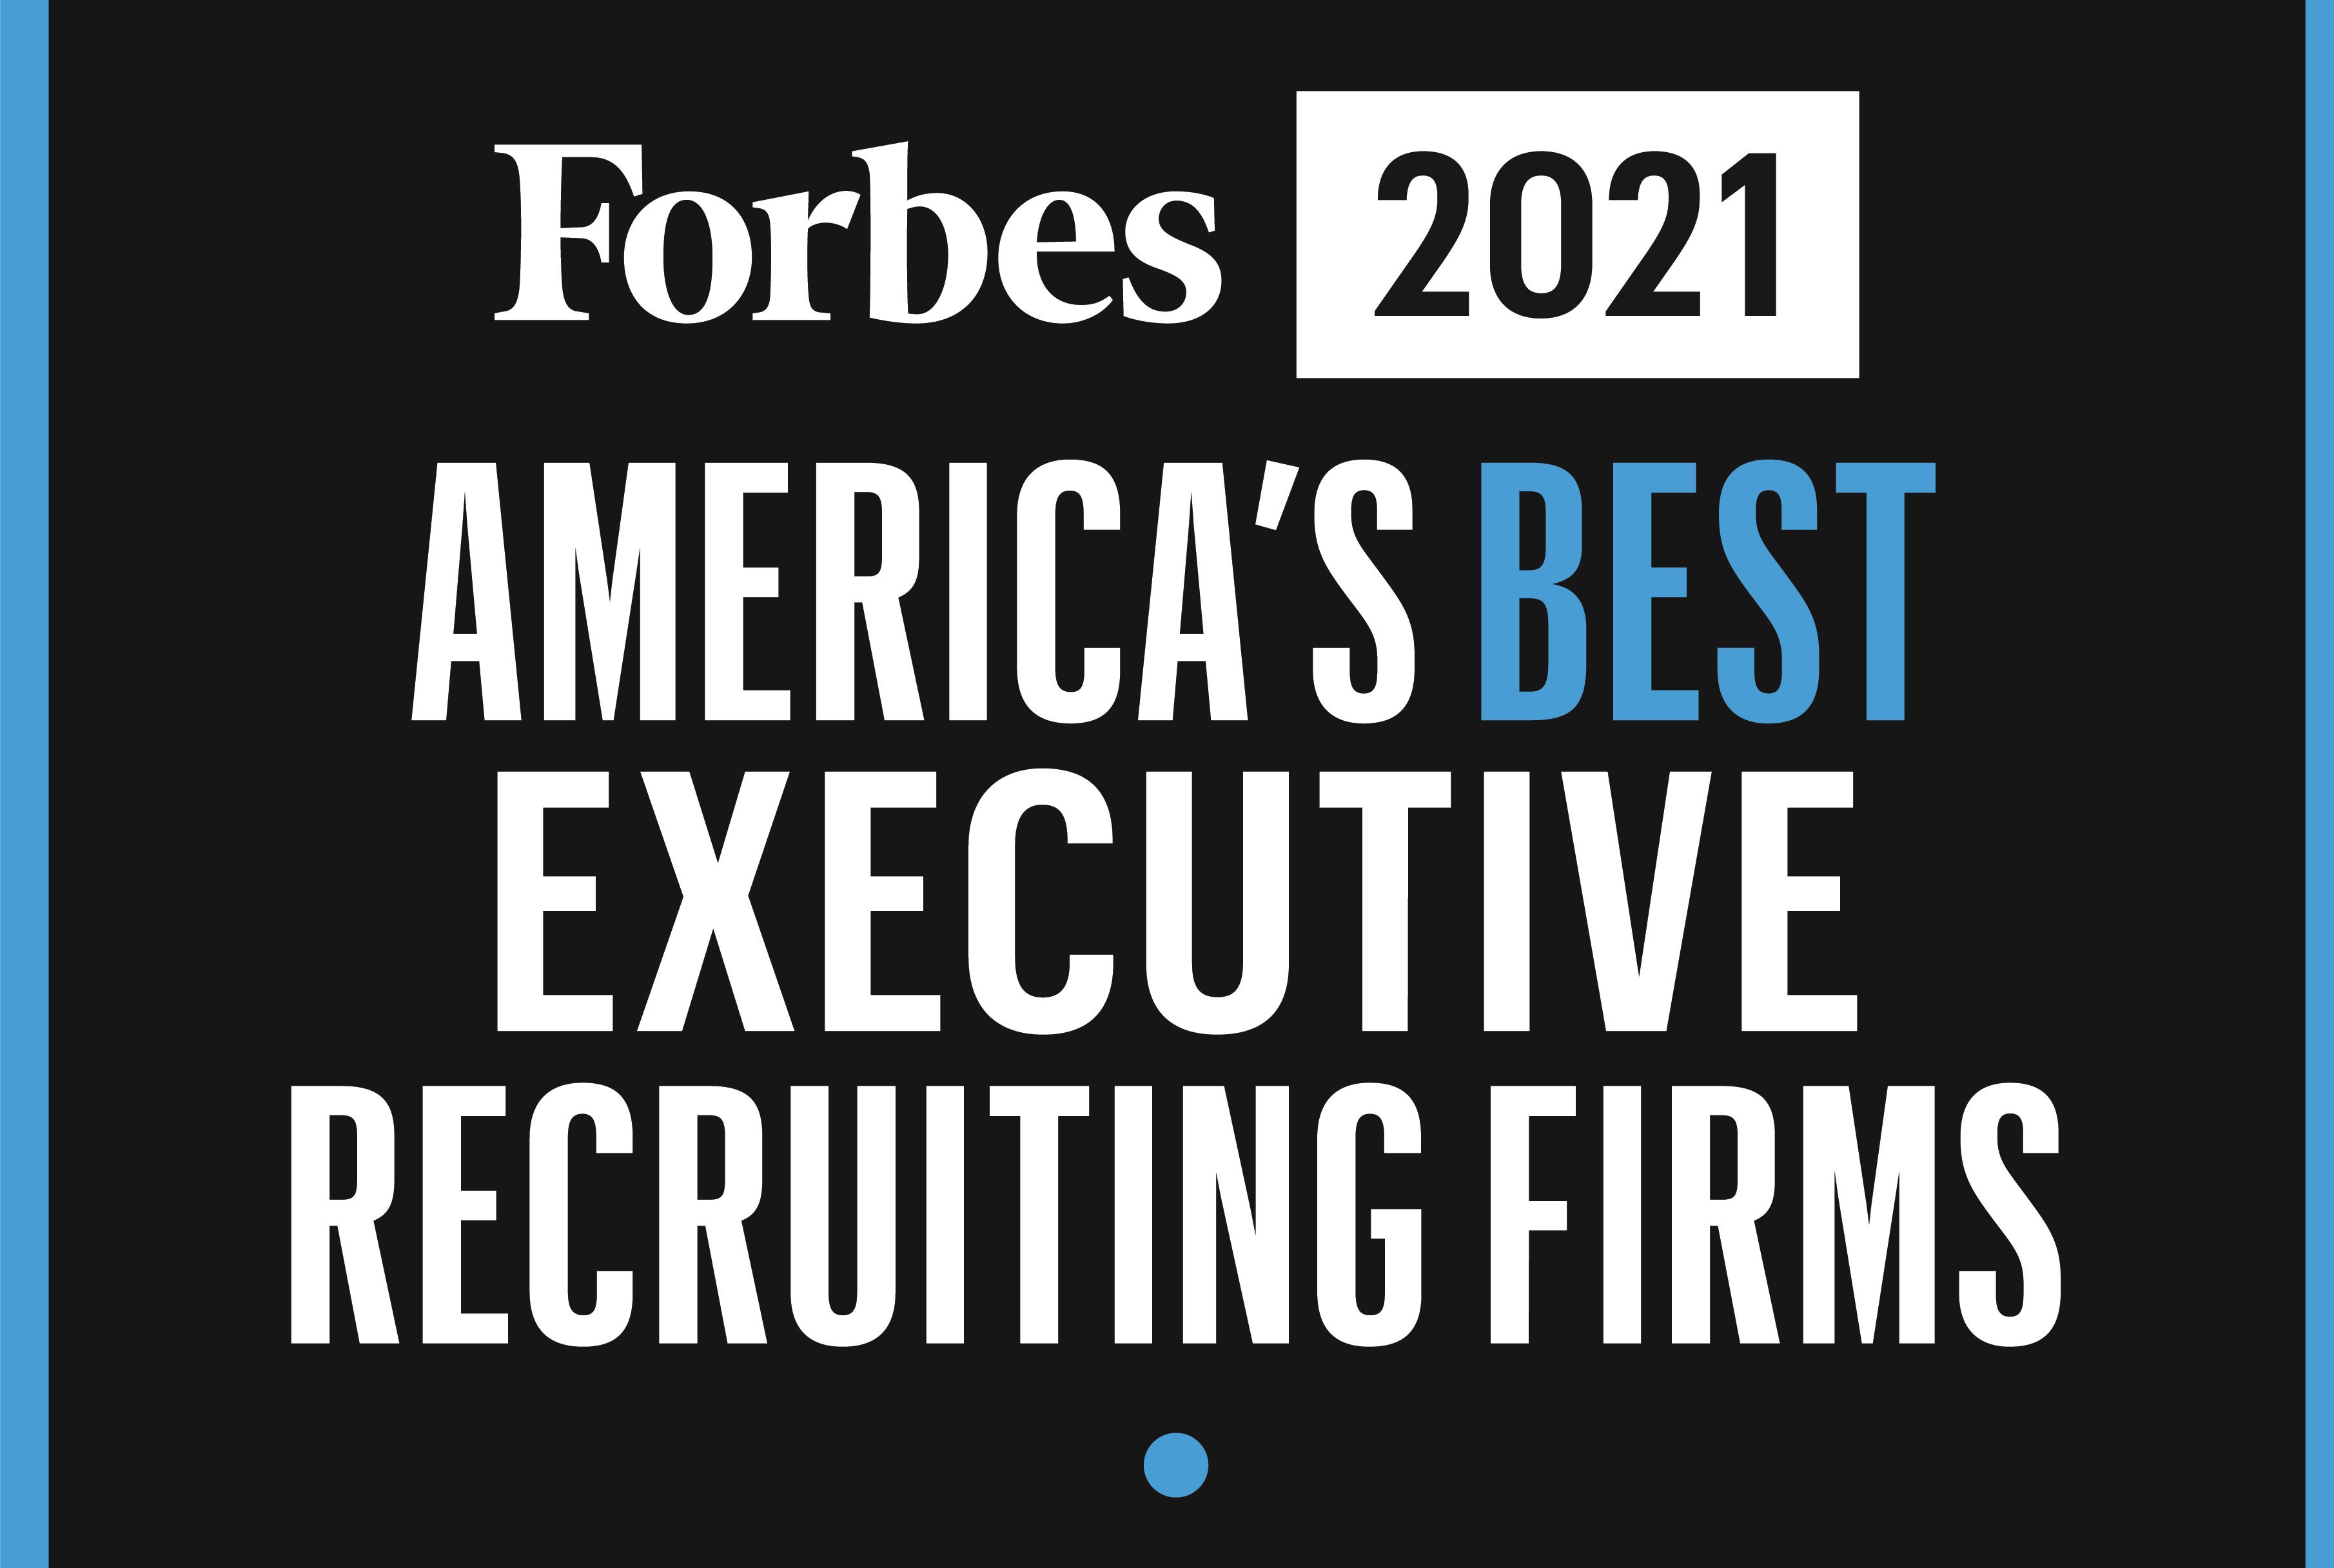 20/20 Foresight Ranked in the Top 25 on 2021 Forbes List of America’s Best Executive Recruiting Firms Featured Image